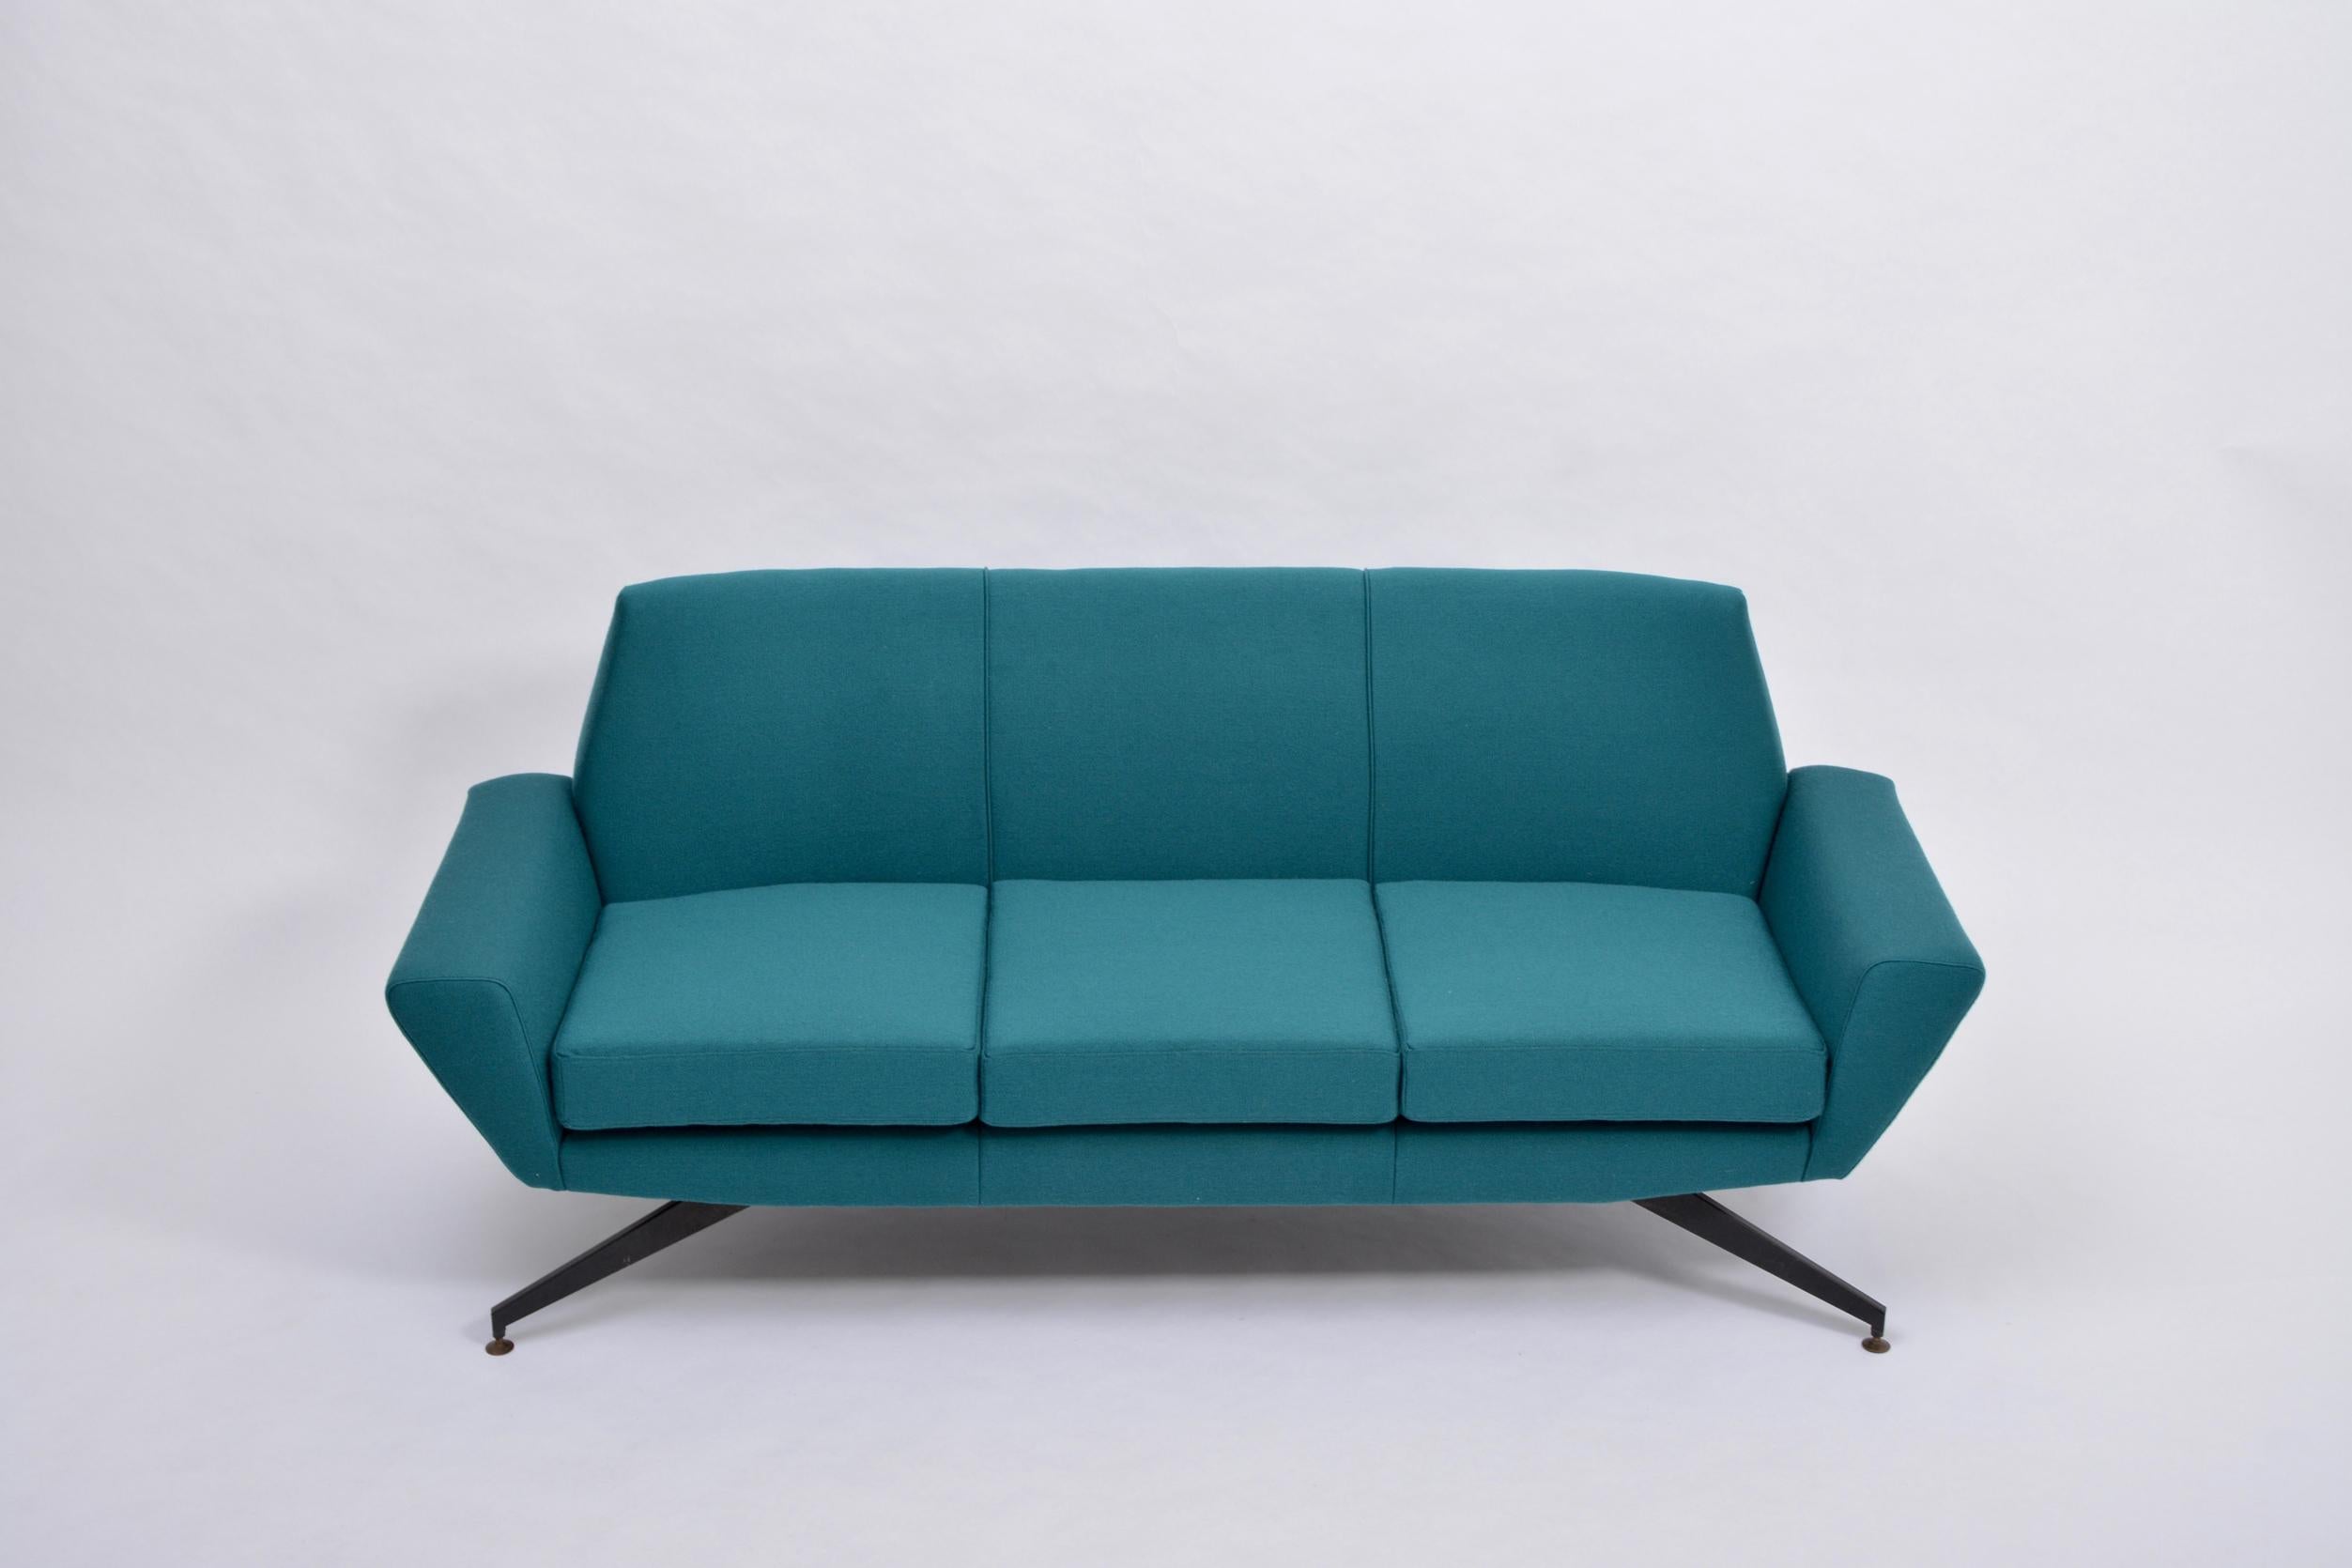 Reupholstered Italian Mid-Century Modern sofa with metal base by Lenzi

This three-seat sofa was produced by Italian company Lenzi in the 1950s. The base is made of lacquered metal.
The sofa has been completely reupholstered in a teal colored fabric.